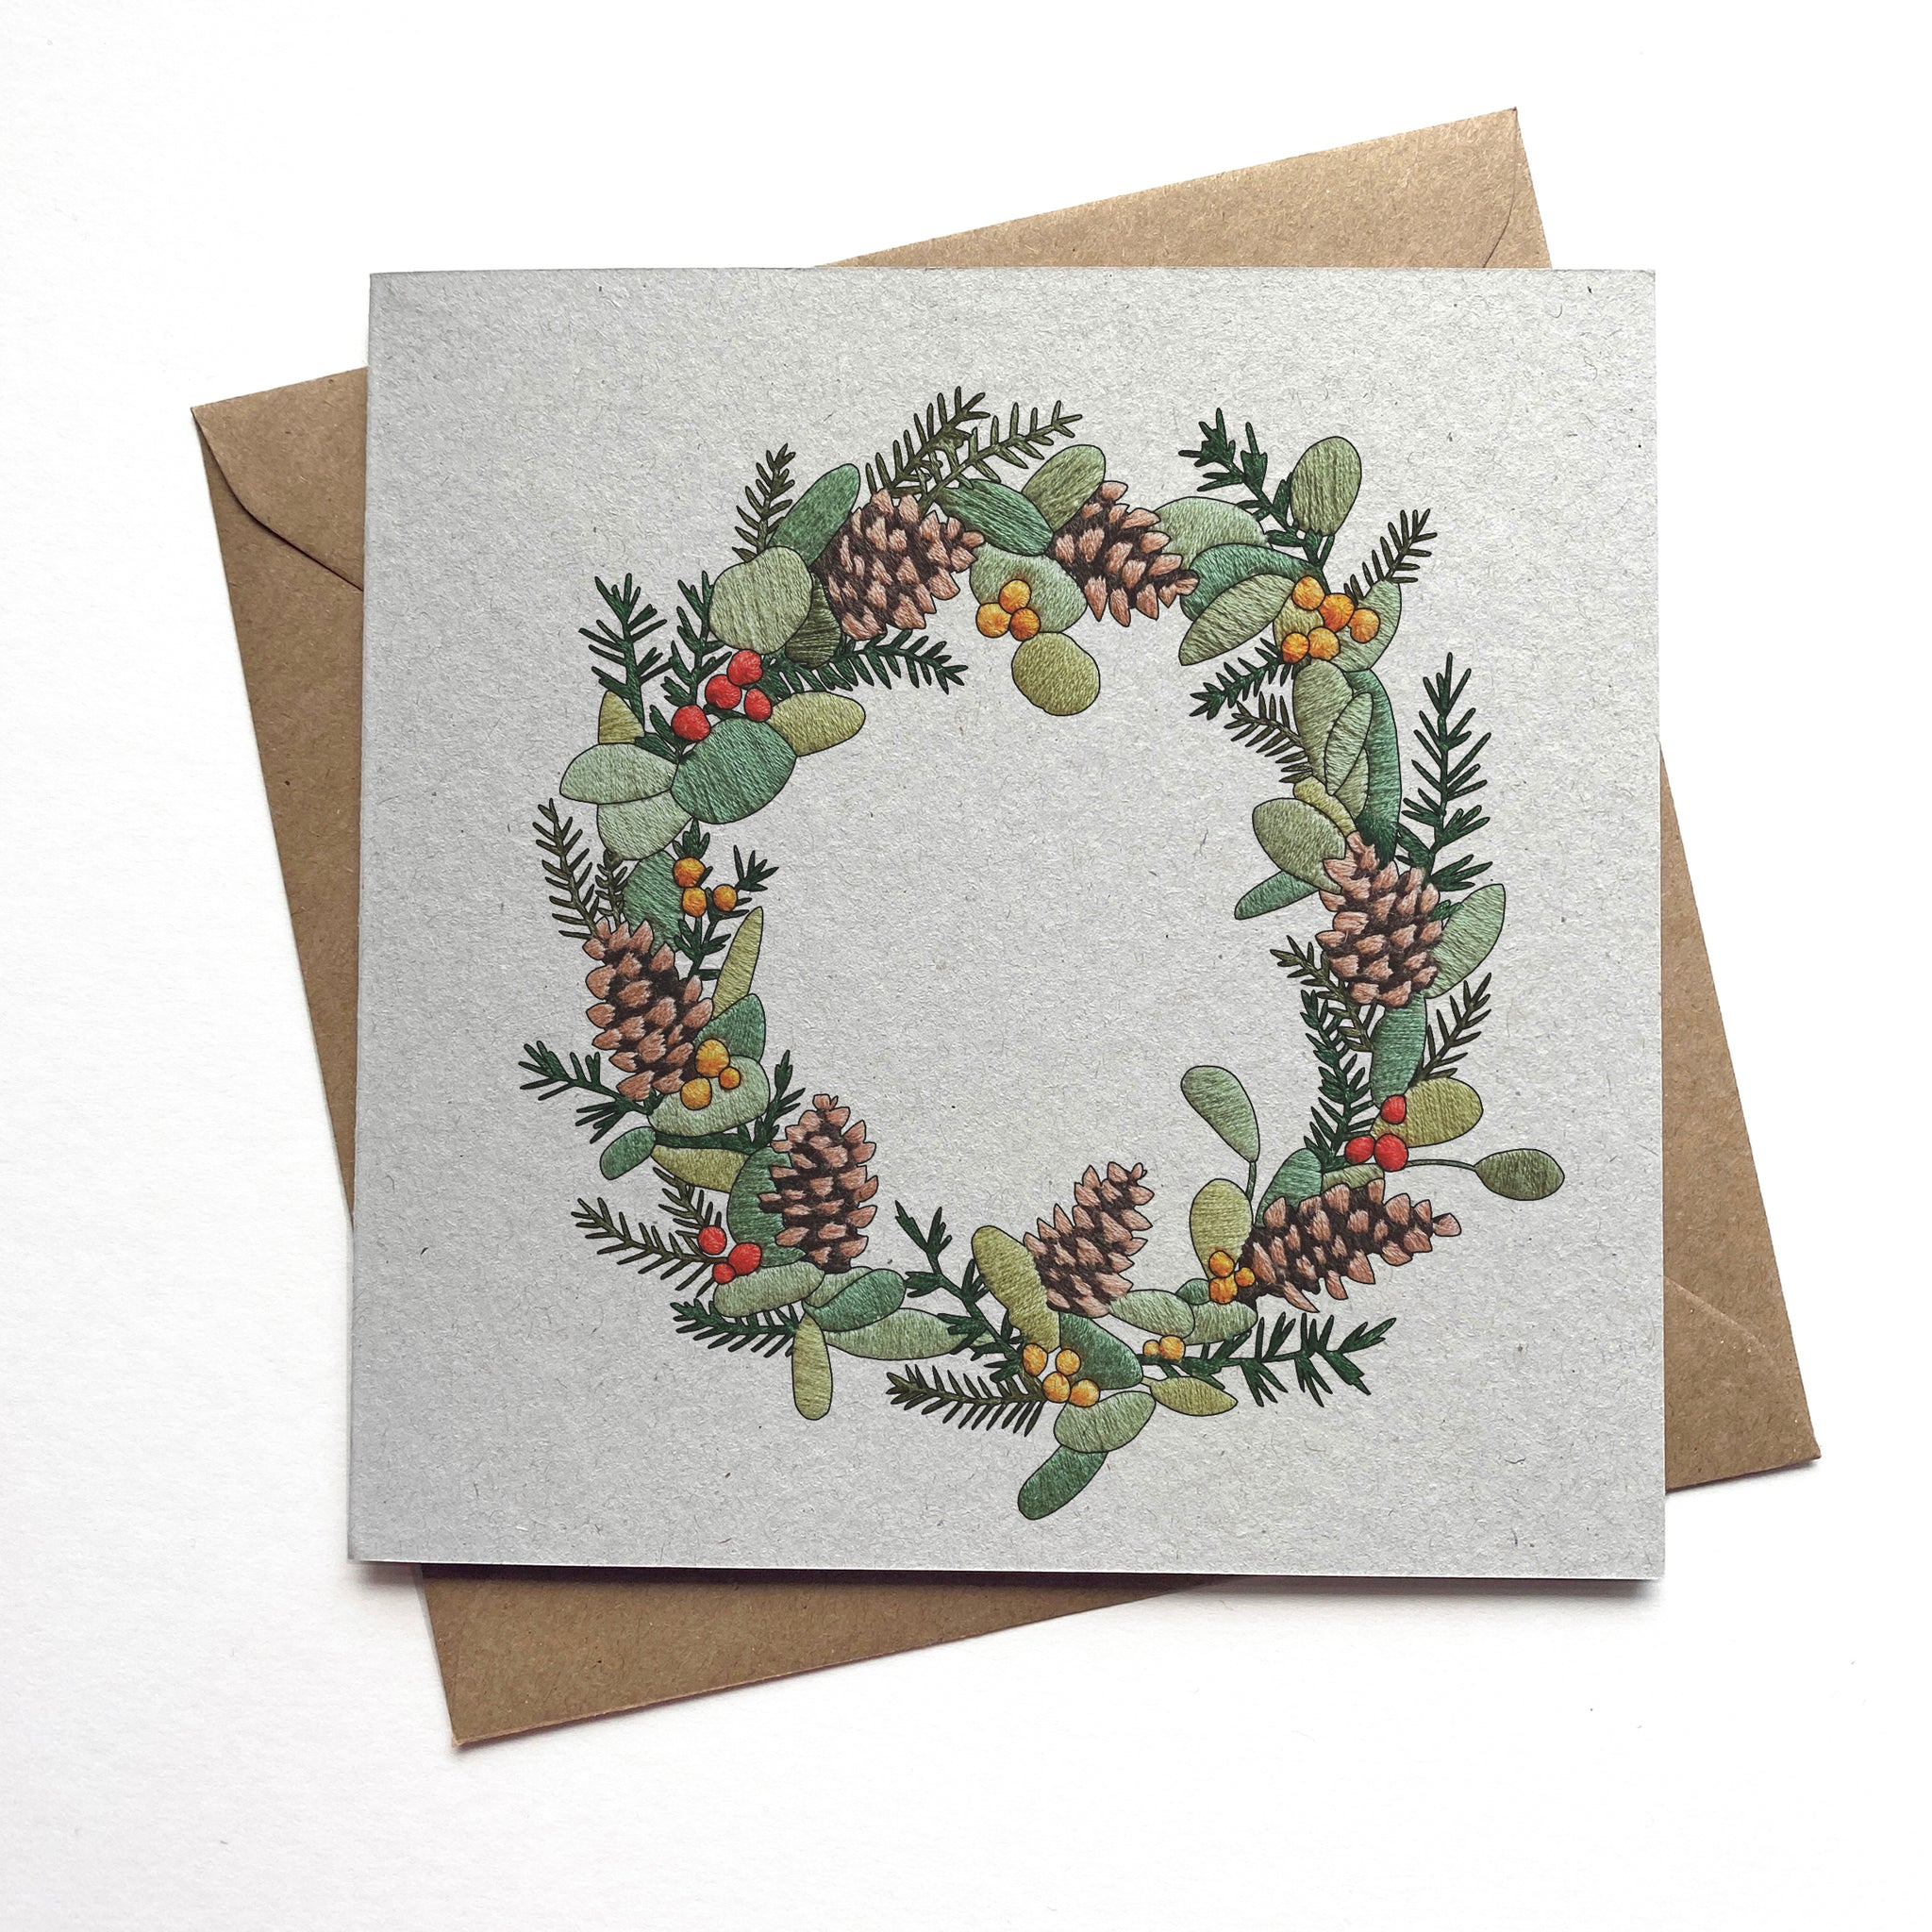 Christmas wreath embroidery printed card